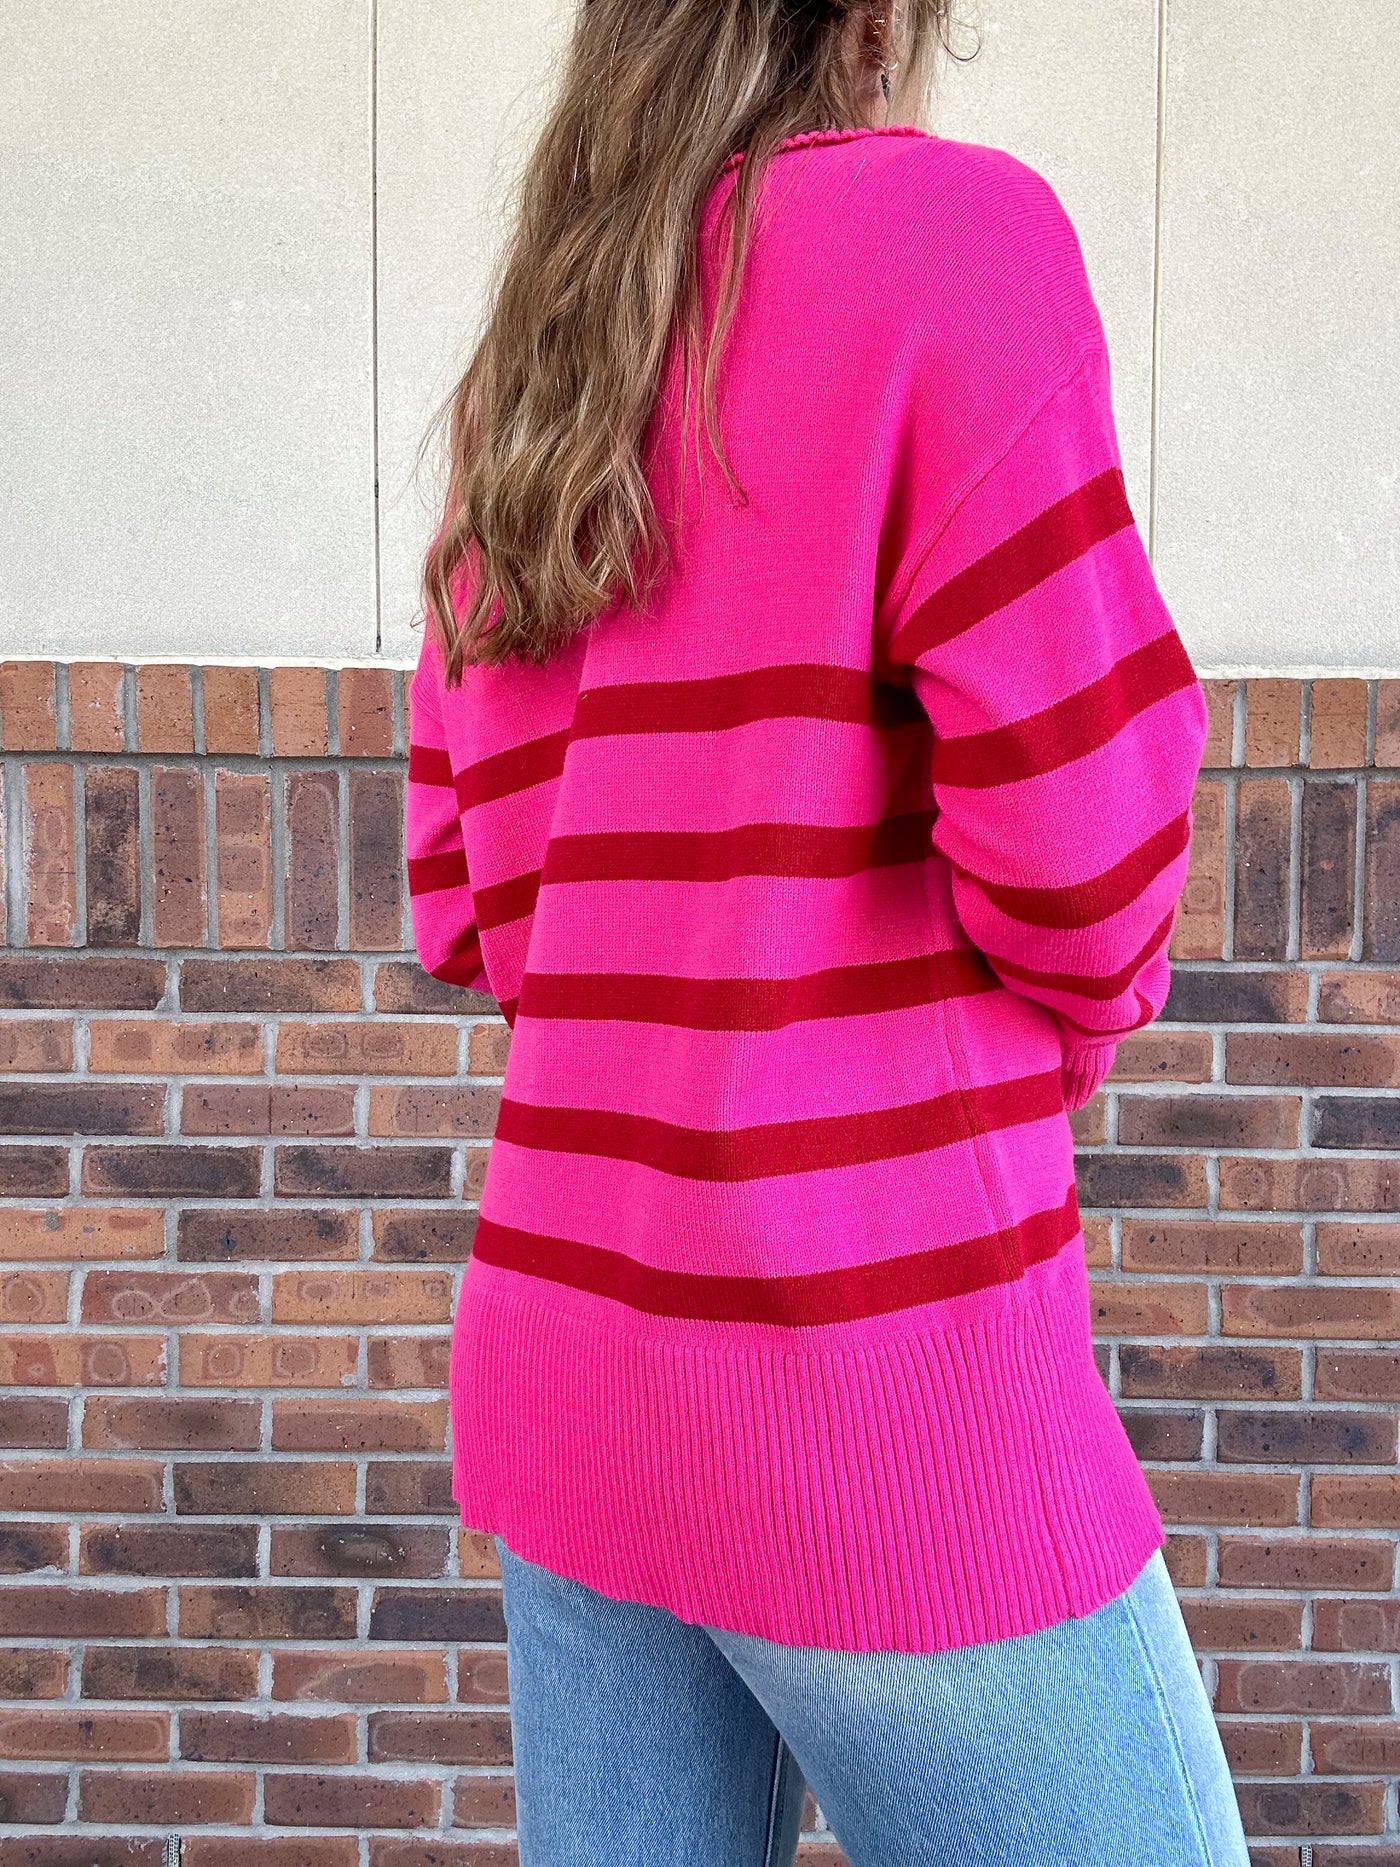 Red and Pink Striped Knit Sweater Top